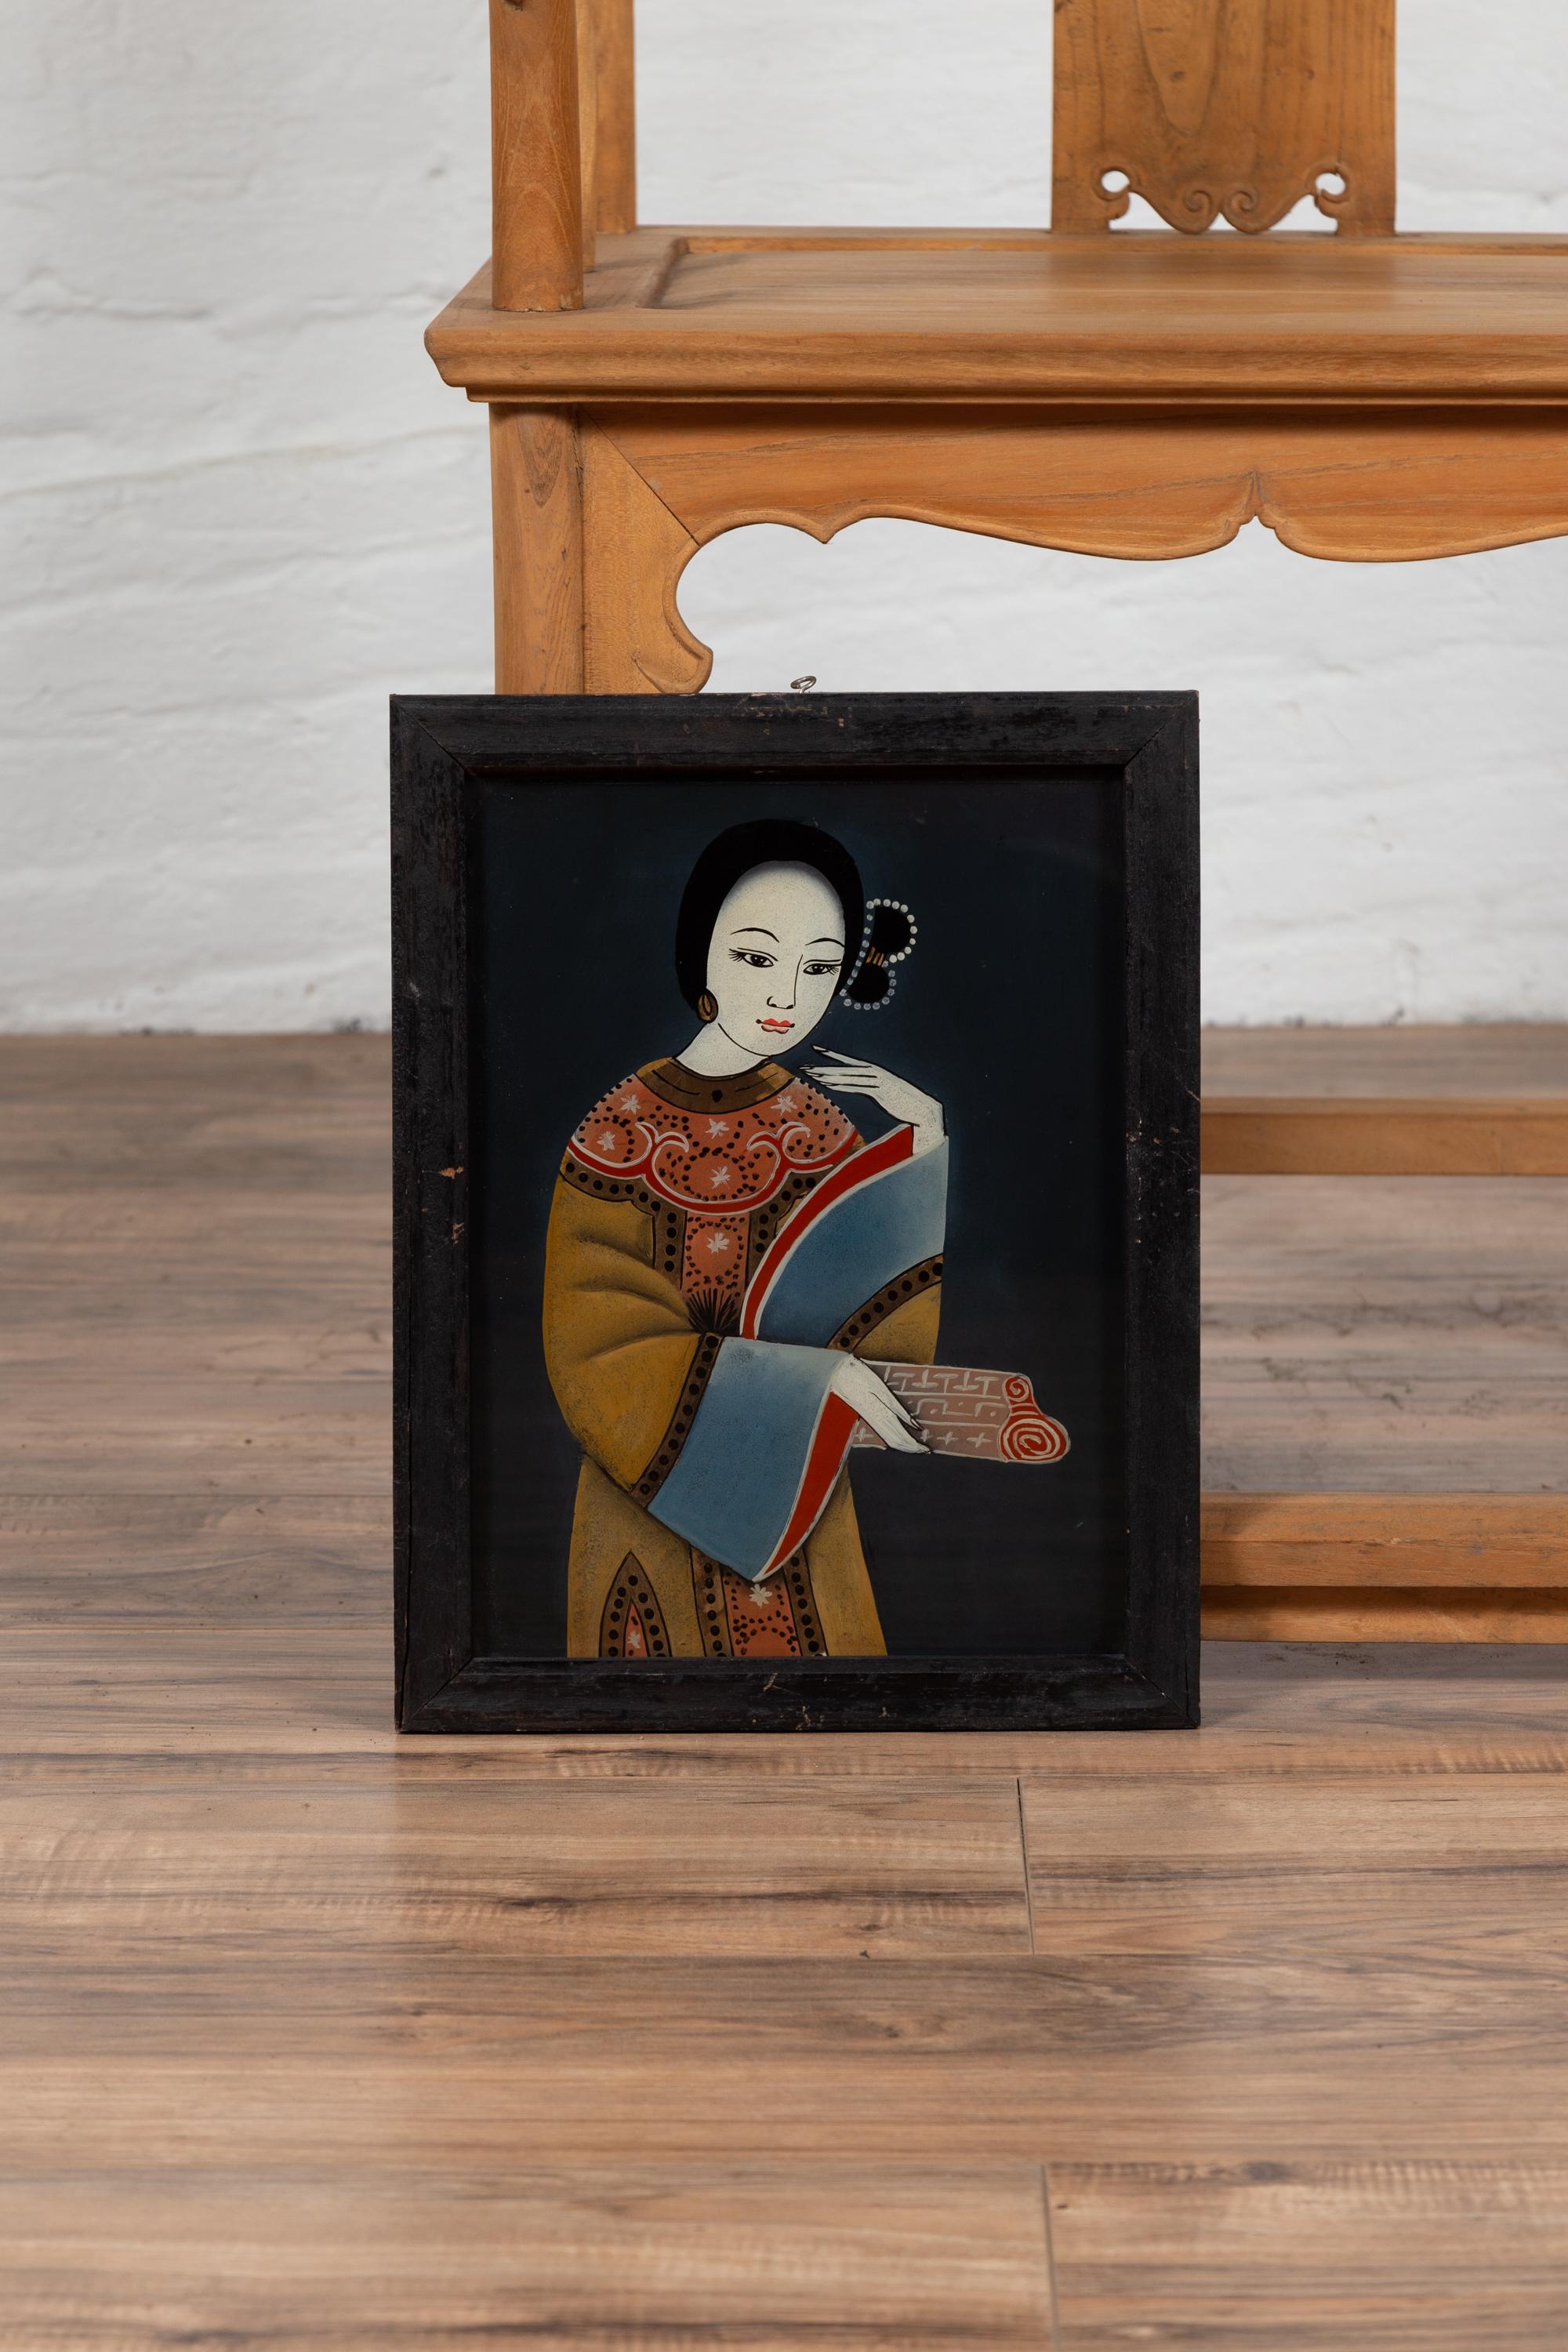 An antique framed Japanese painting on glass from the early 20th century depicting a woman. Born in Japan during the early years of the 20th century, this exquisite painting on glass depicts an elegant woman, dressed with a lovely mustard, blue